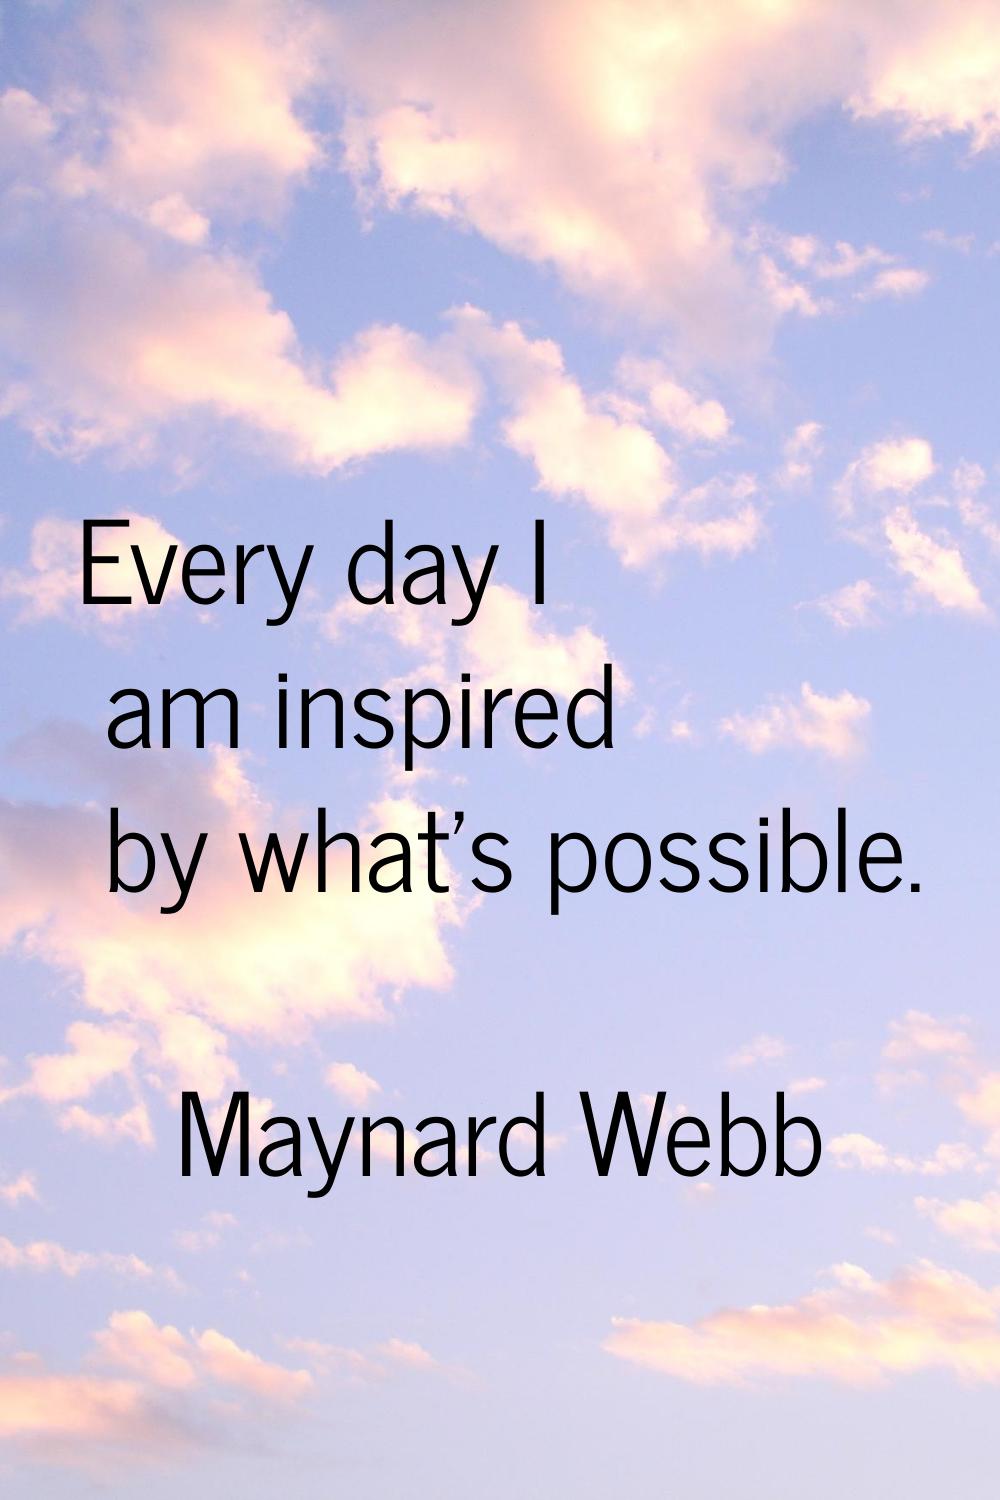 Every day I am inspired by what's possible.